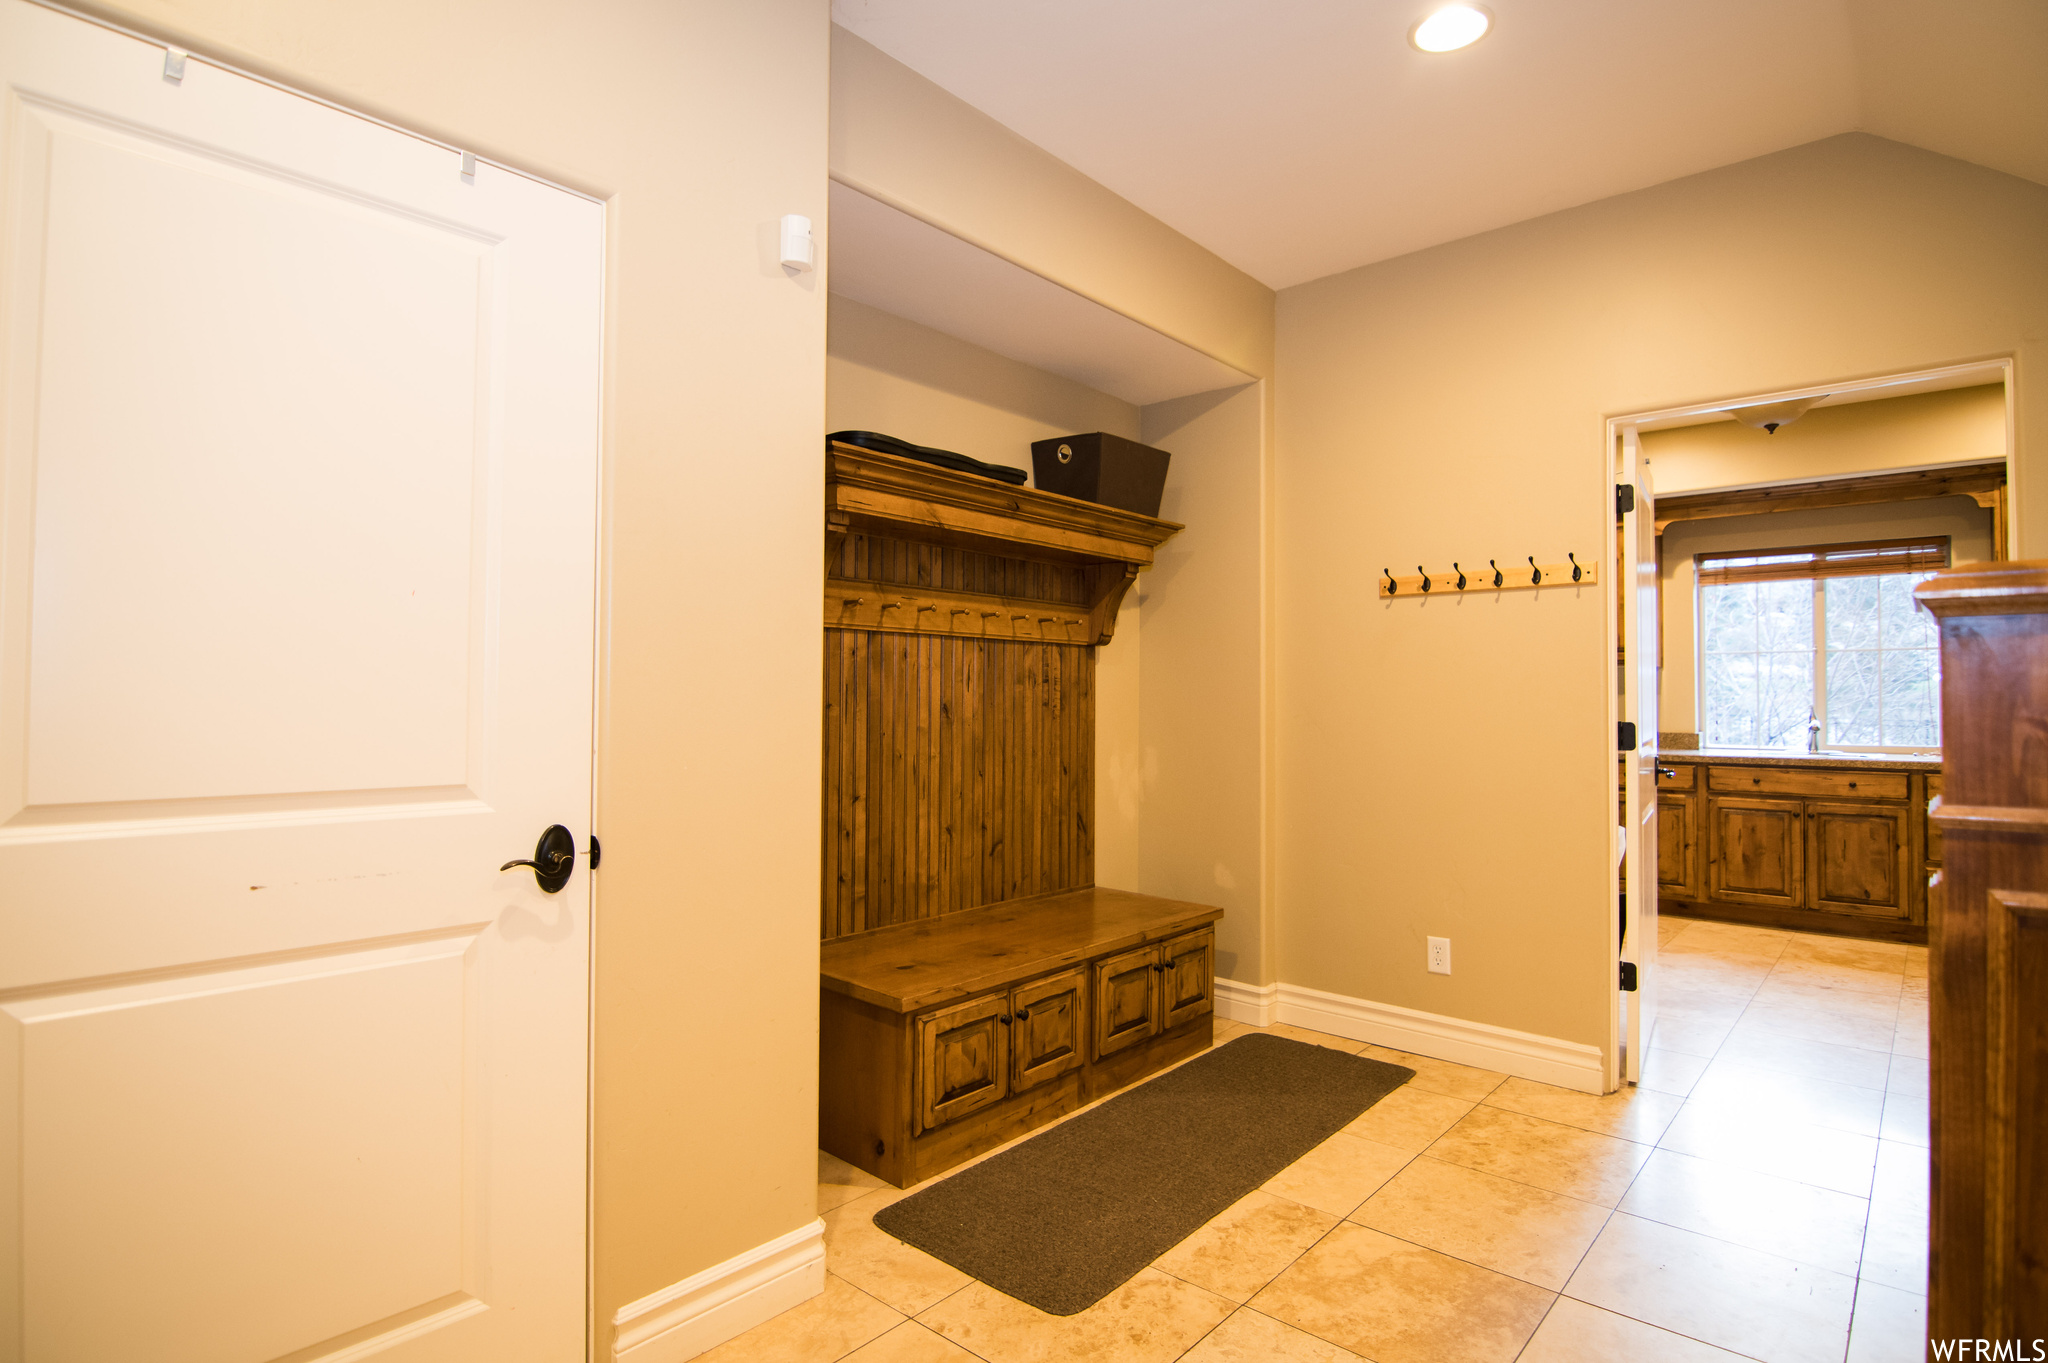 Mudroom featuring vaulted ceiling, sink, and light tile floors